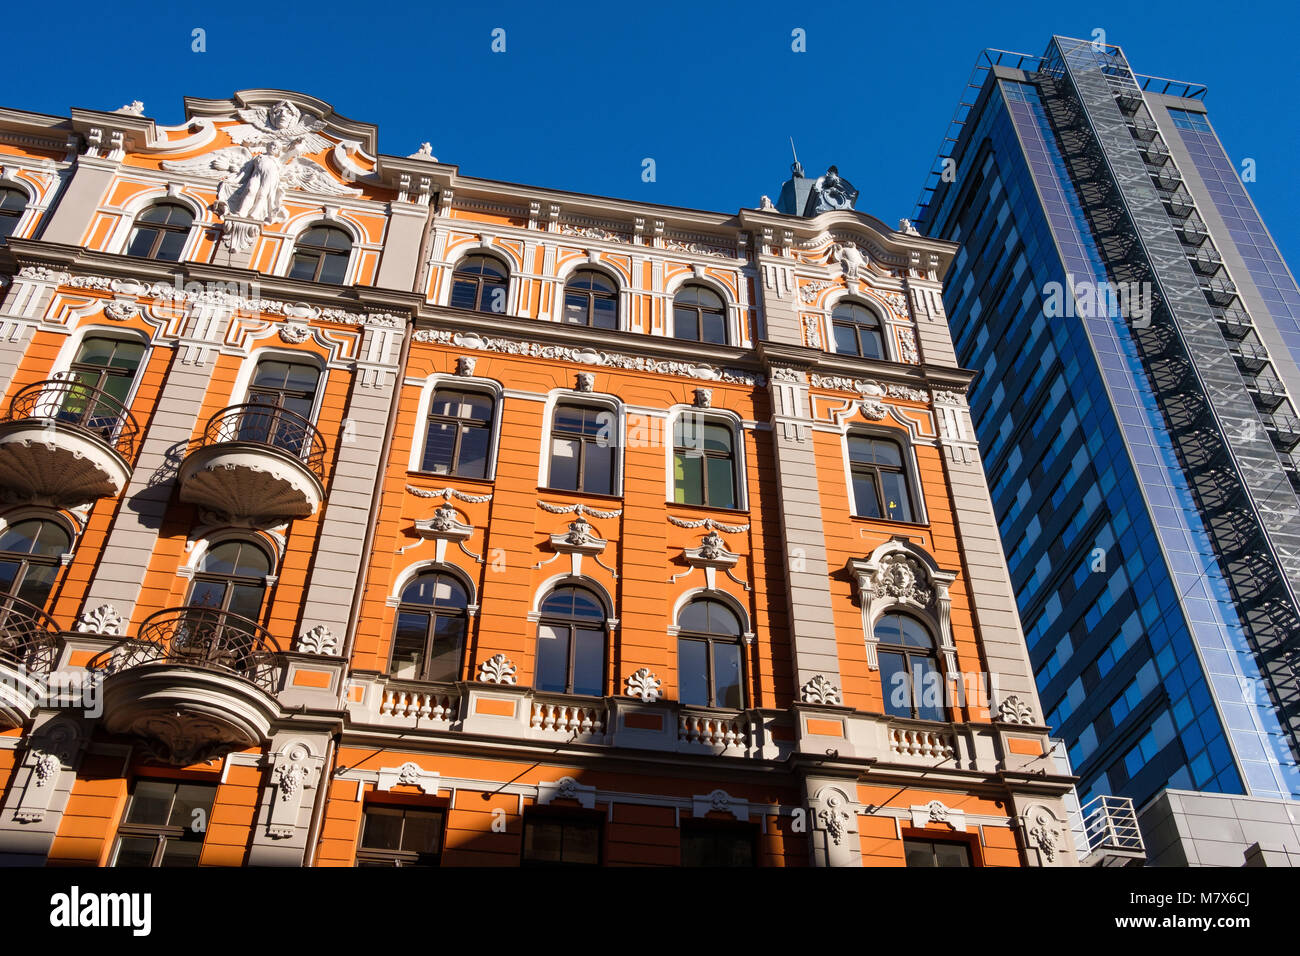 Latvia, Riga. Buildings in the Art Nouveau style in the medieval Old Town (Vecriga). Renovated facade near the building of the Radisson Hotel. Stock Photo